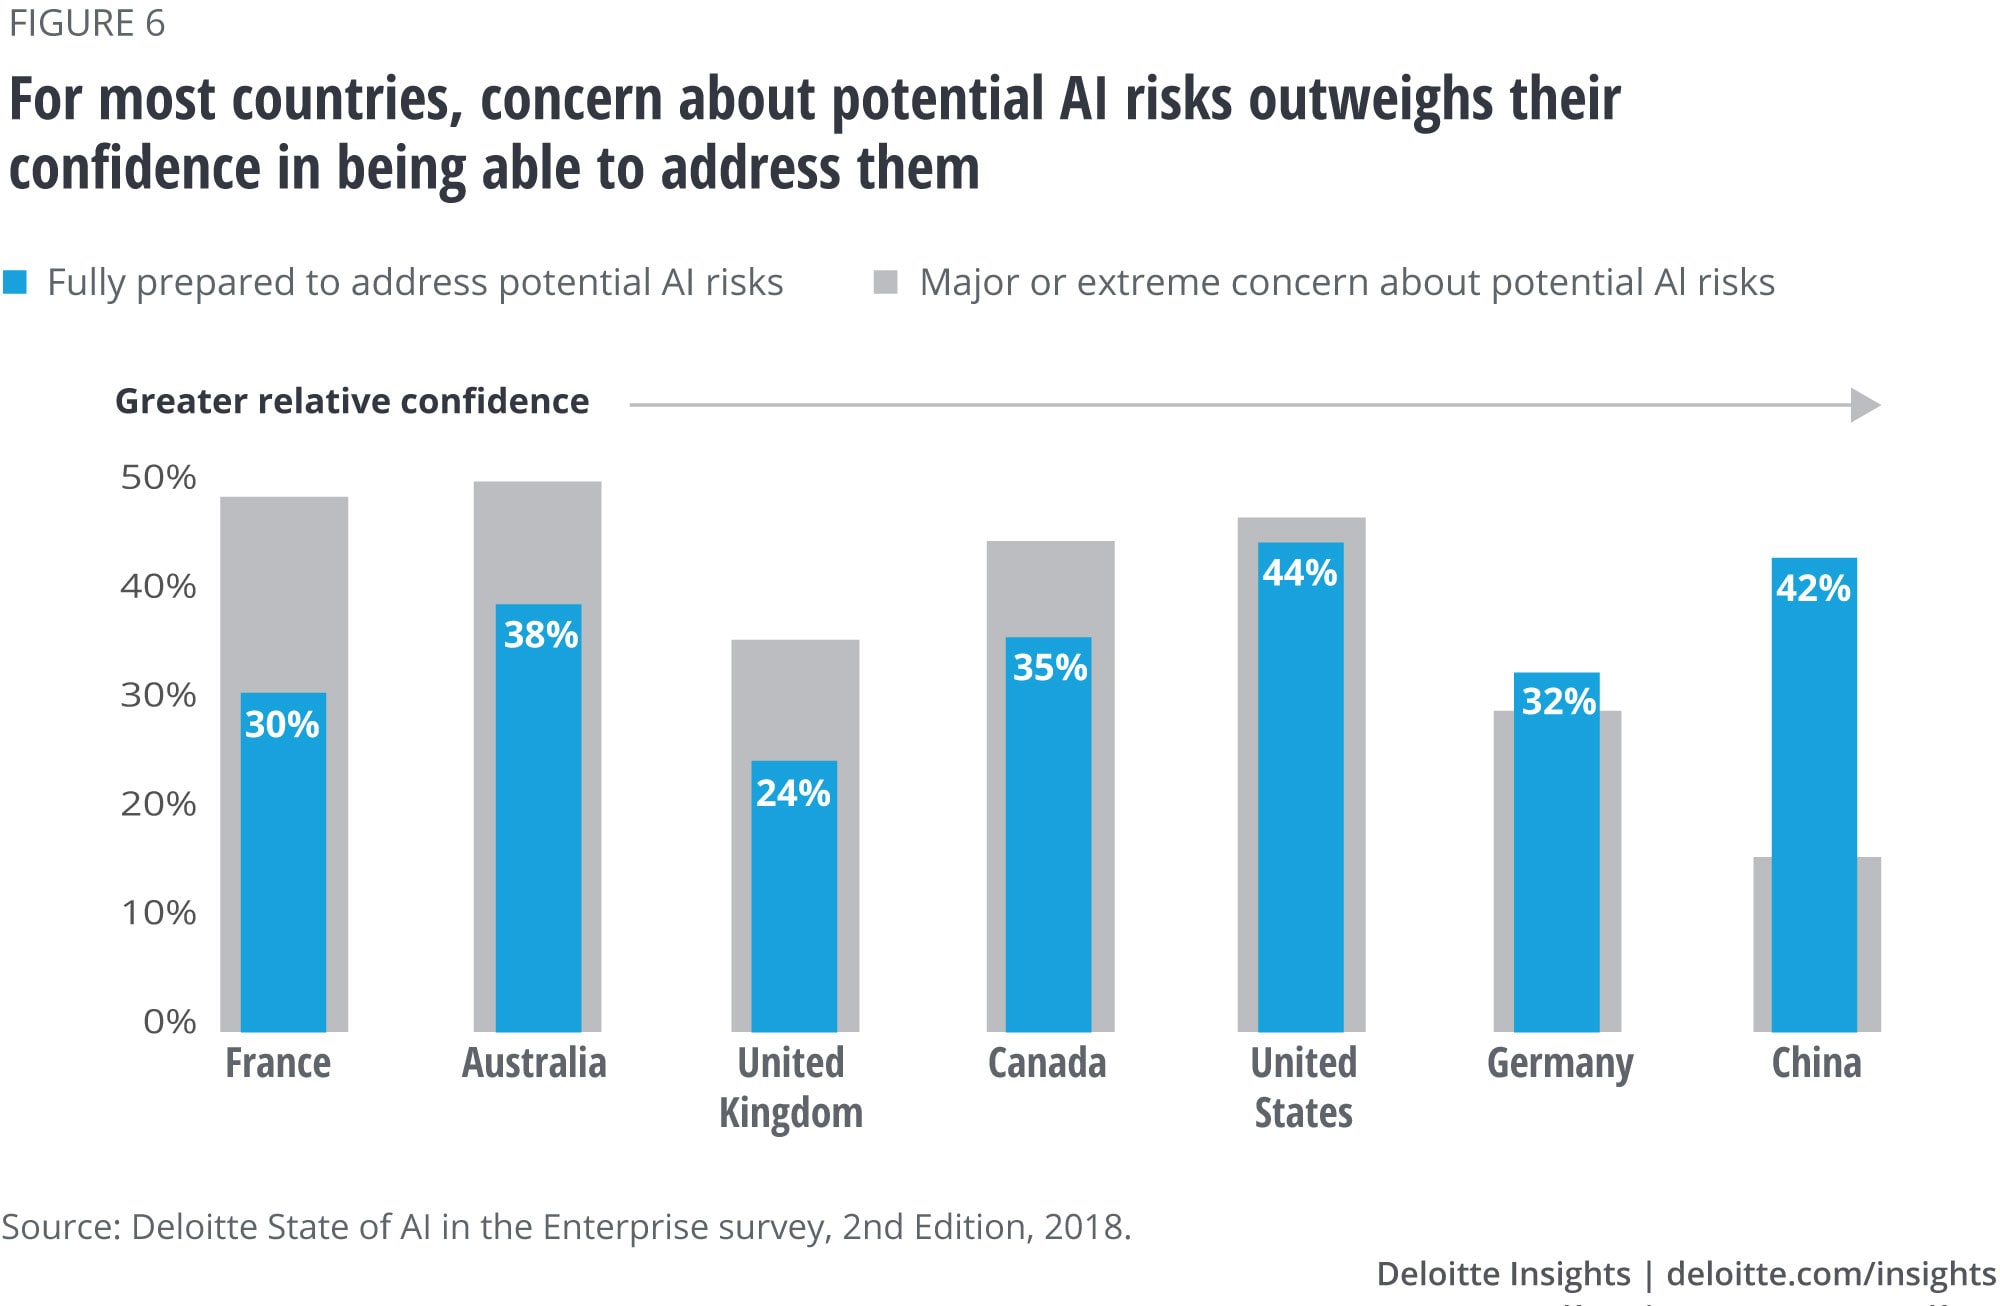 For most countries, concern about potential AI risks outweighs their confidence in being able to address them